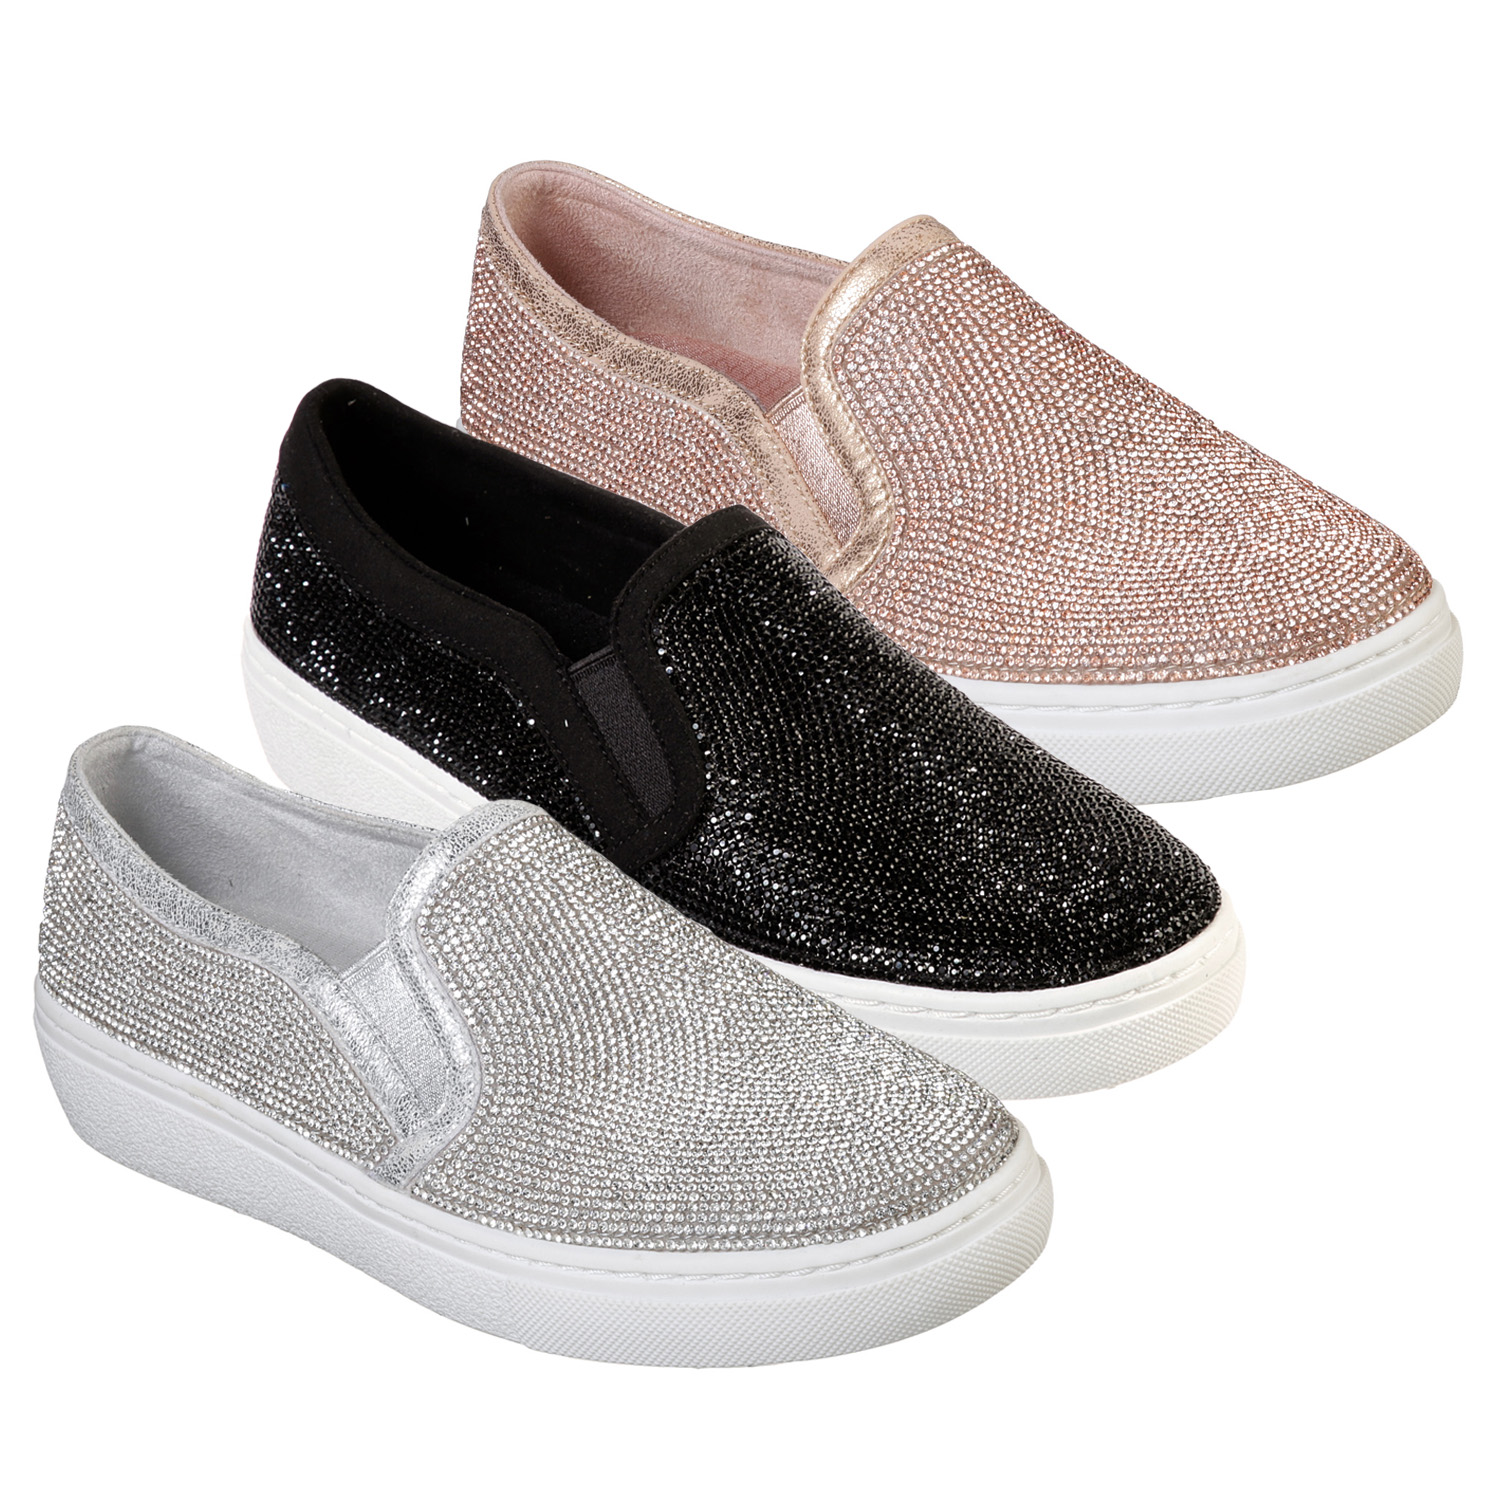 skechers womens sparkly shoes Sale,up 